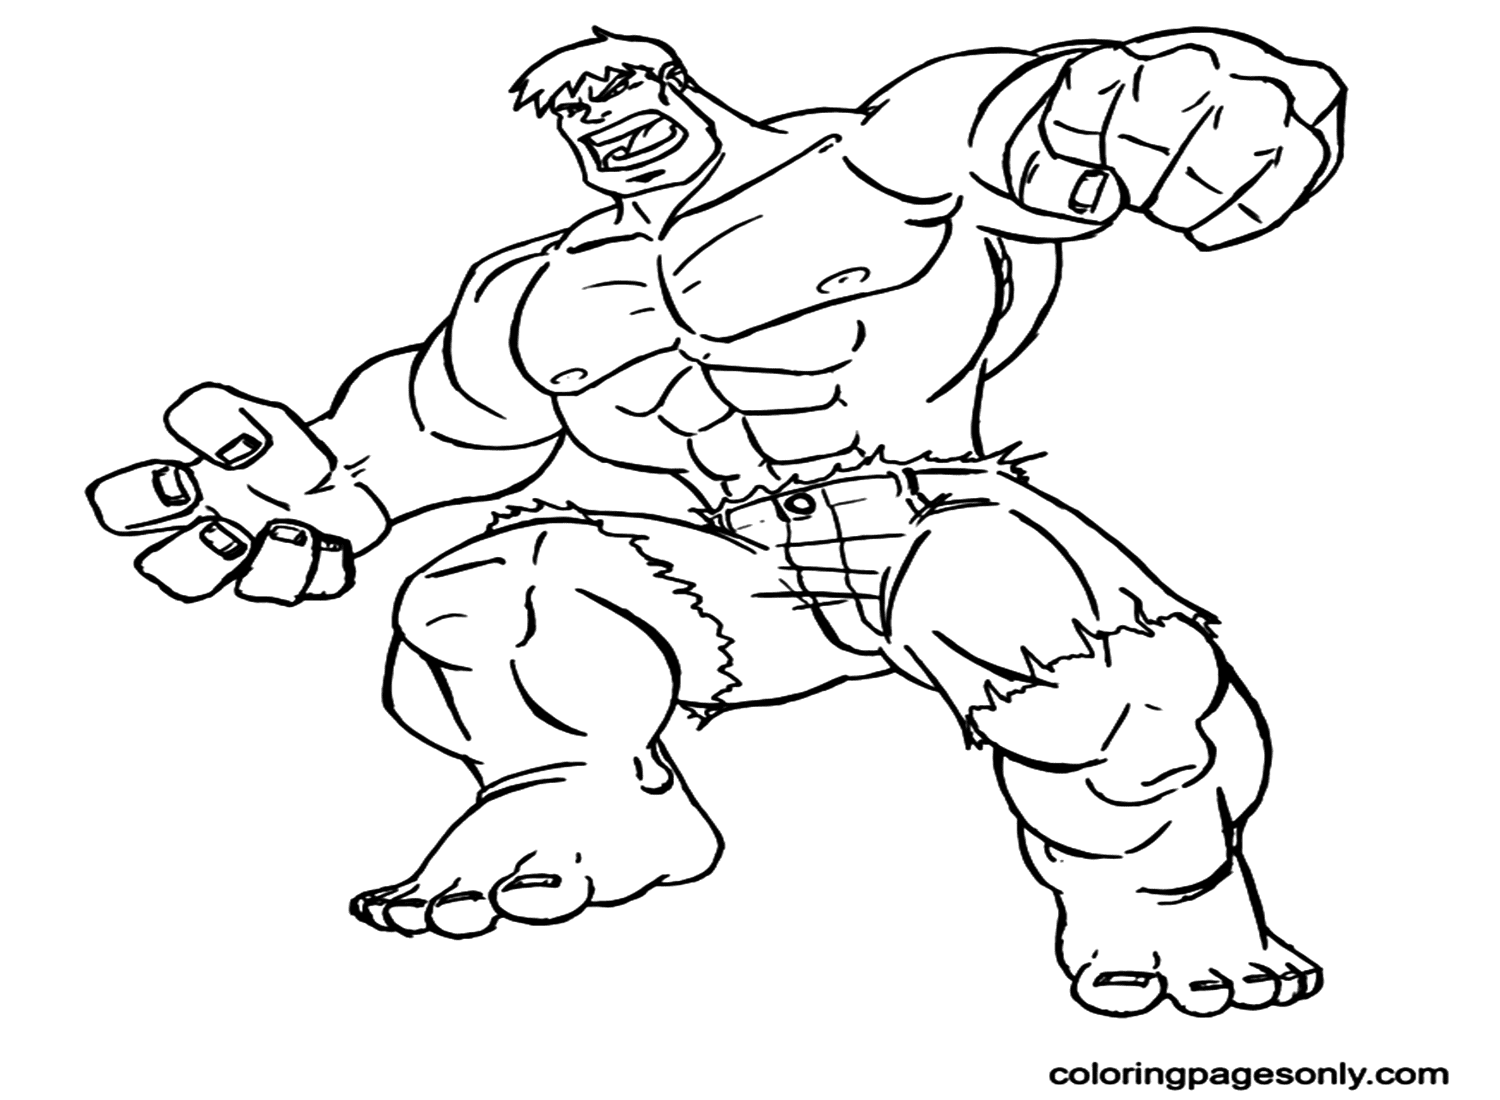 Marvel Hulk from Avengers Coloring Pages